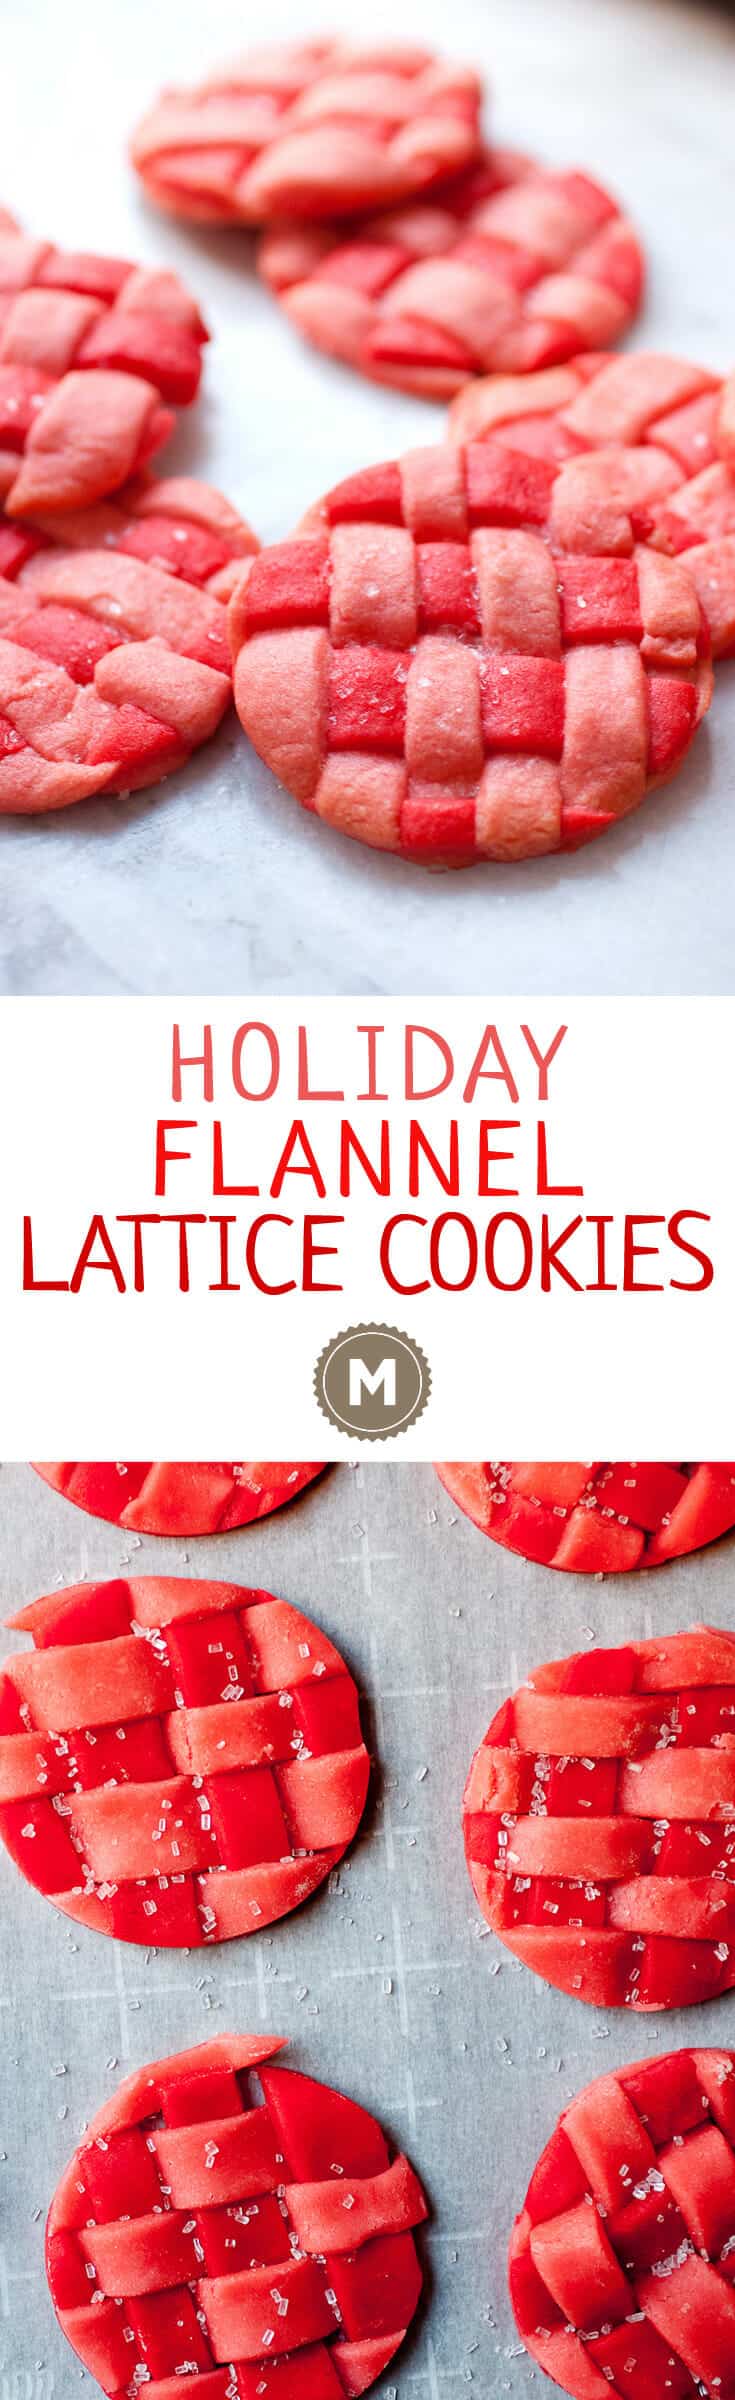 Holiday Flannel Lattice Cookies: Simple sugar cookies weaved into a fun holiday lattice. Bake them until they are crispy (or leave them a little soft). Who doesn't love a fun new cookie during the holidays?! | macheesmo.com